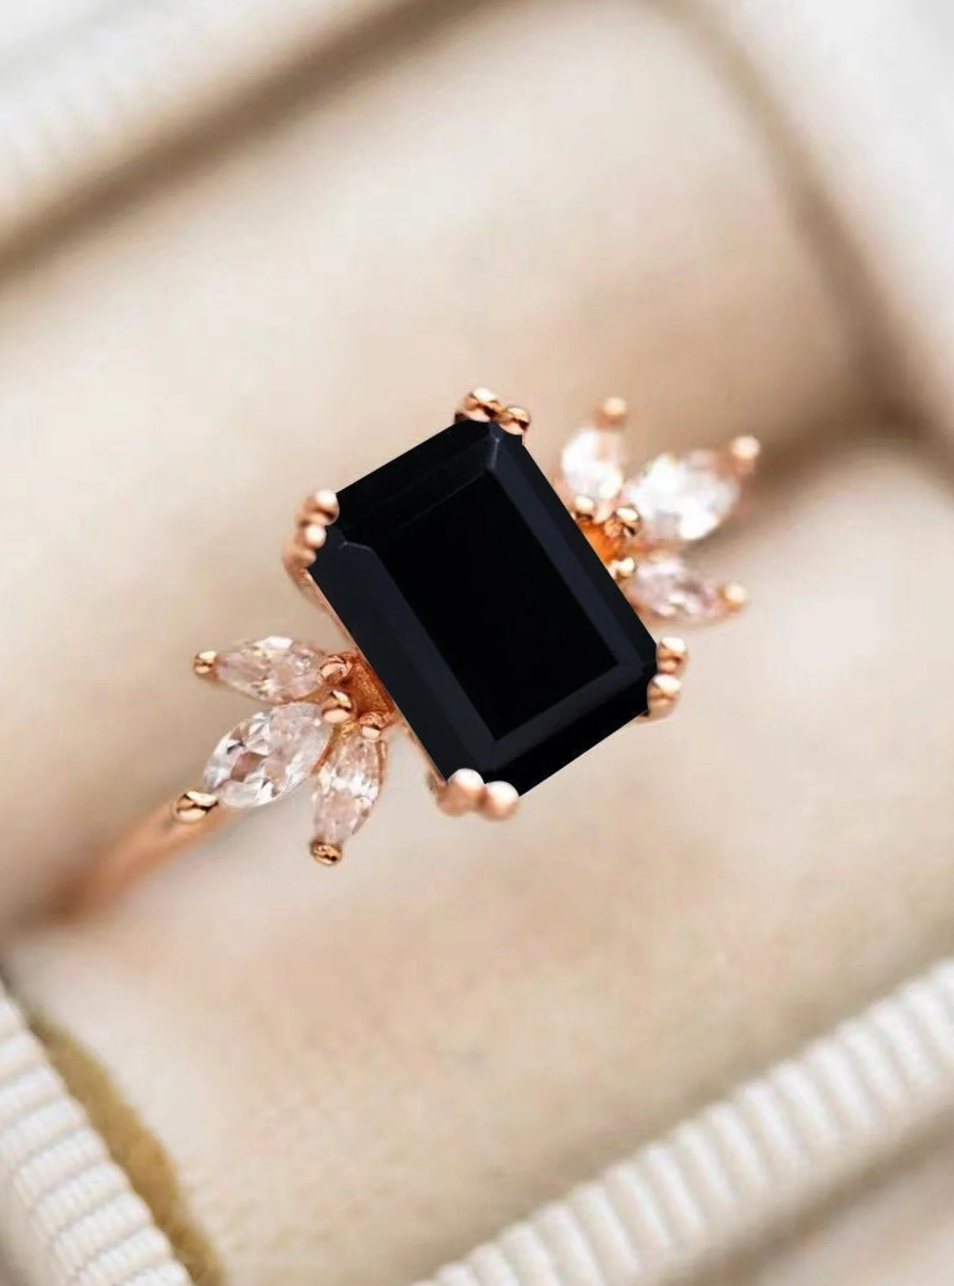 Black Diamond Engagement Rings For Sale | Trusted Since 1986